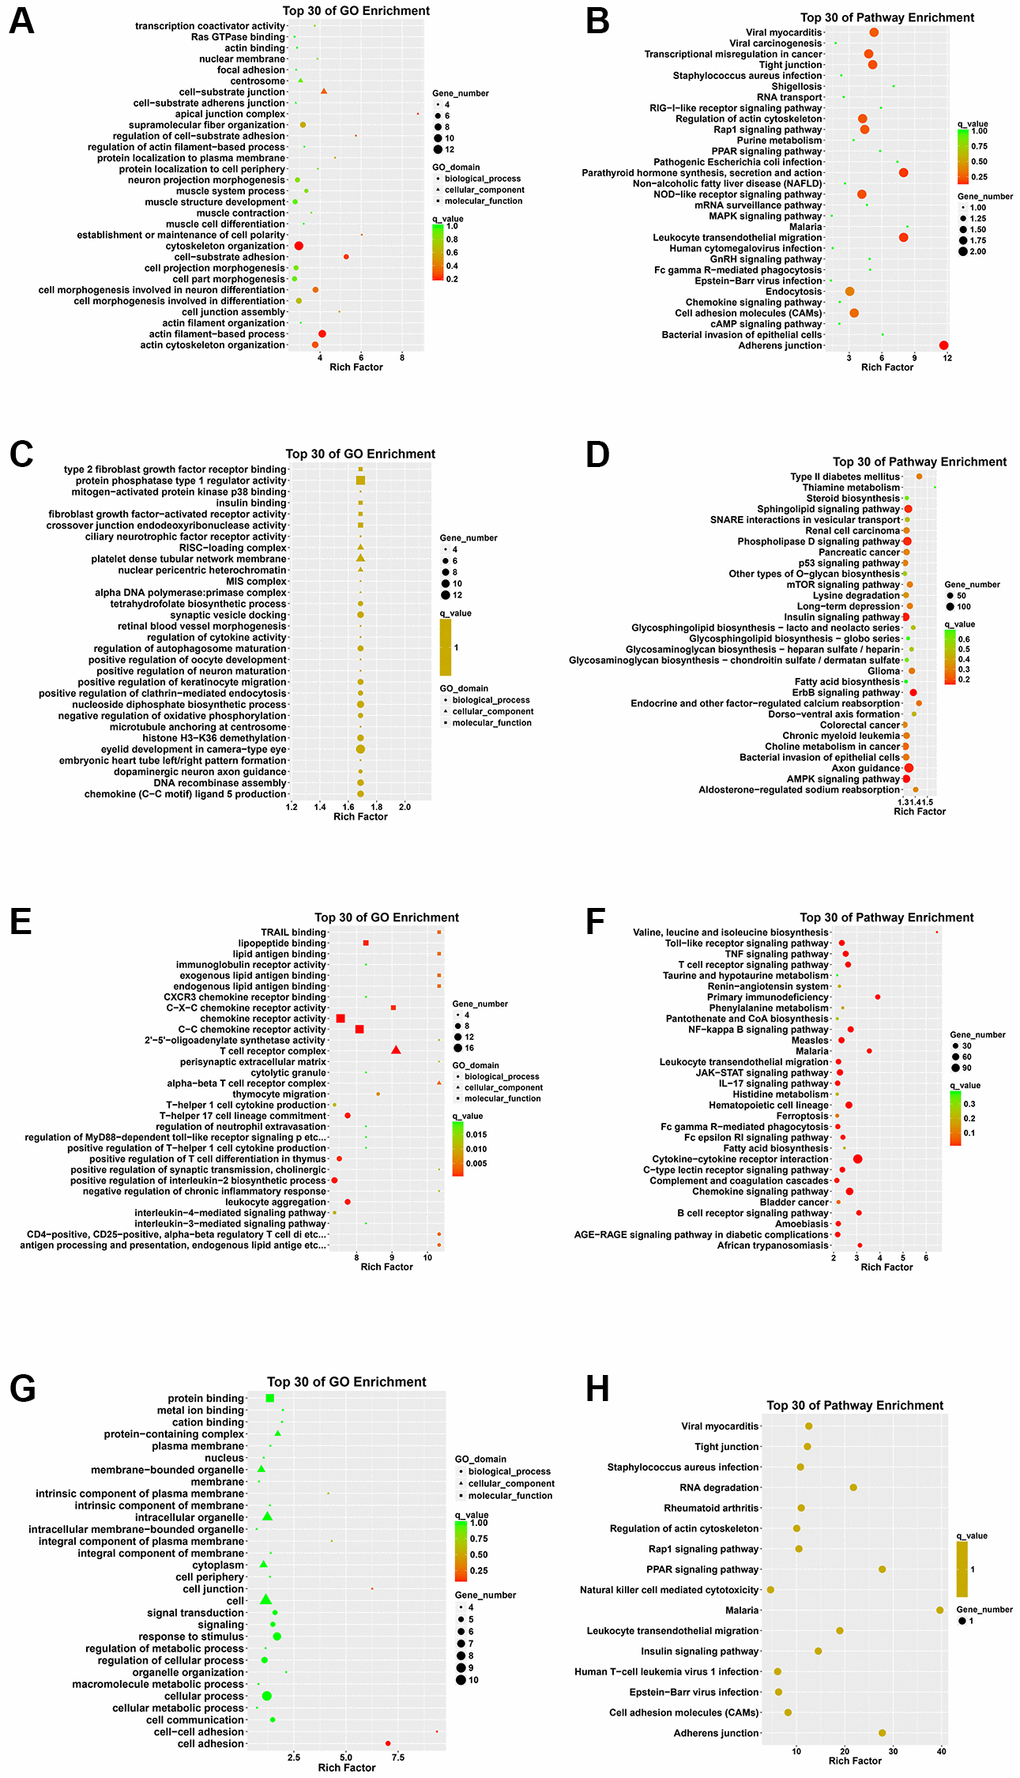 GO annotation and KEGG pathway analysis of DEcircRNA parental genes, DEmiRNA target genes, DEmRNAs, and genes that intersect DEcircRNA parental genes with DEmRNAs. (A) Top 30 enriched GO terms of the DEcircRNA parental genes. (B) Top 30 enriched KEGG pathways of the DEcircRNA parental genes. (C) Top 30 enriched GO terms of the DEmiRNA target genes. (D) Top 30 enriched KEGG pathways of the DEmiRNA target genes. (E) Top 30 enriched GO terms of the DEmRNAs. (F) Top 30 enriched KEGG pathways of the DEmRNAs. (G) Top 30 enriched GO terms of genes that intersect DEcircRNA parental genes with DEmRNAs. (H) Top 30 enriched KEGG pathways of genes that intersect DEcircRNA parental genes with DEmRNAs.